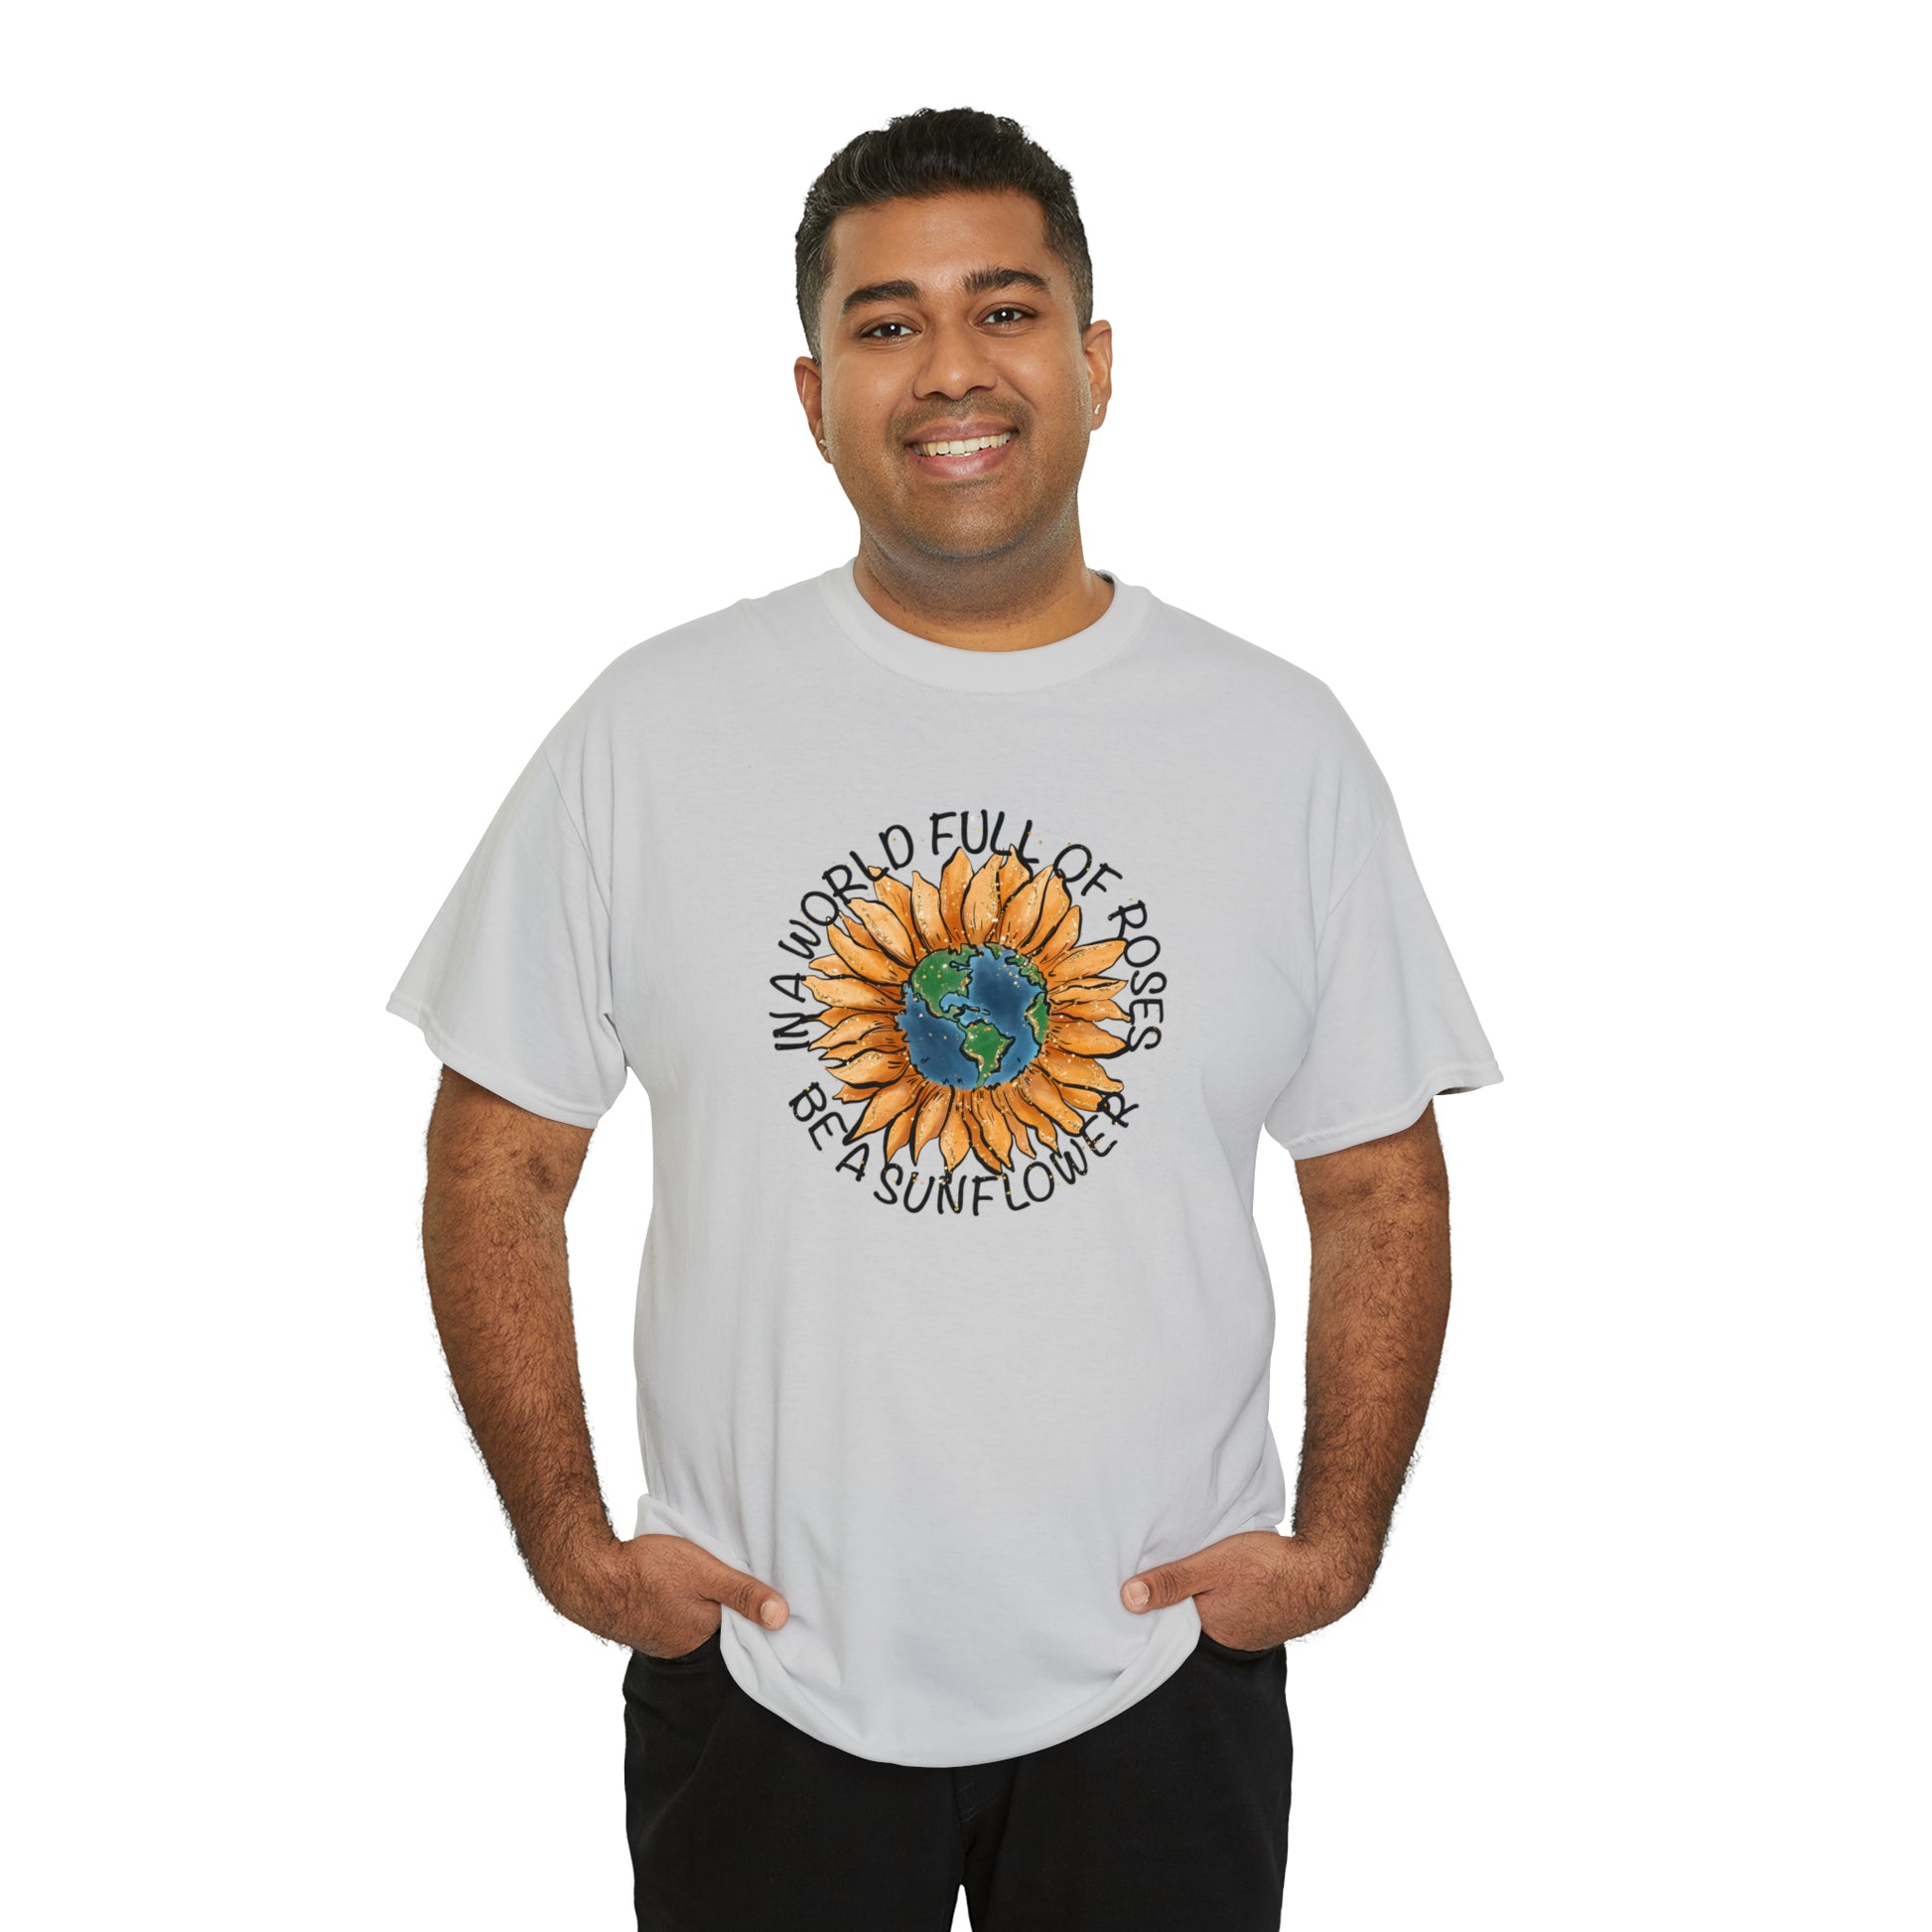 "Be A Sunflower" T-shirt - Weave Got Gifts - Unique Gifts You Won’t Find Anywhere Else!